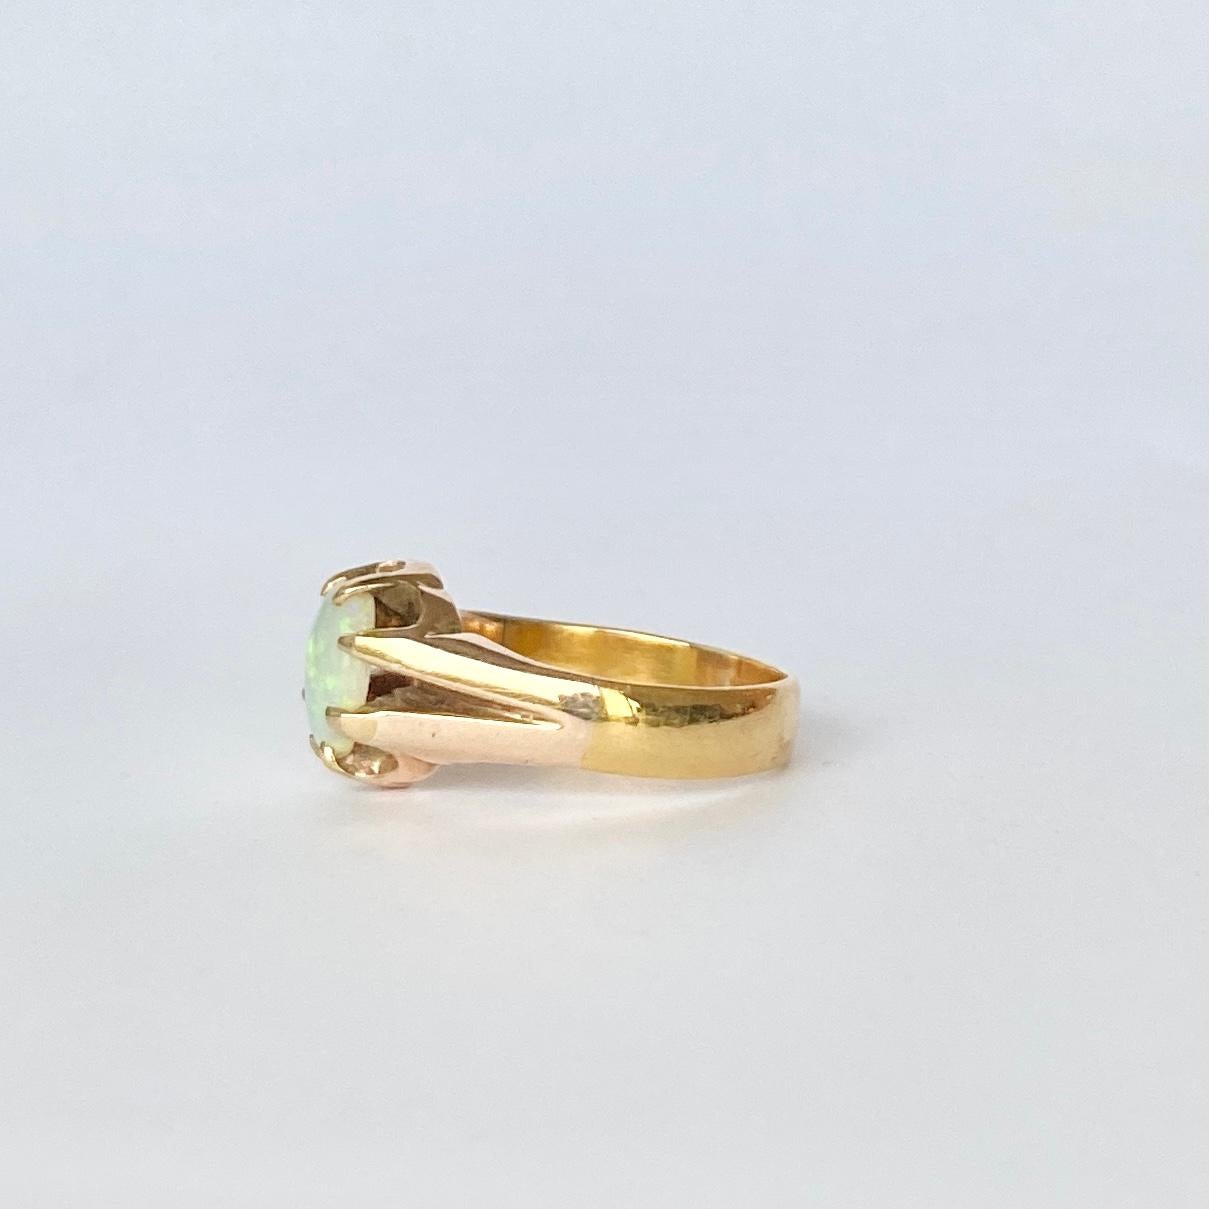 Women's Art Deco Opal and 9 Carat Gold Ring